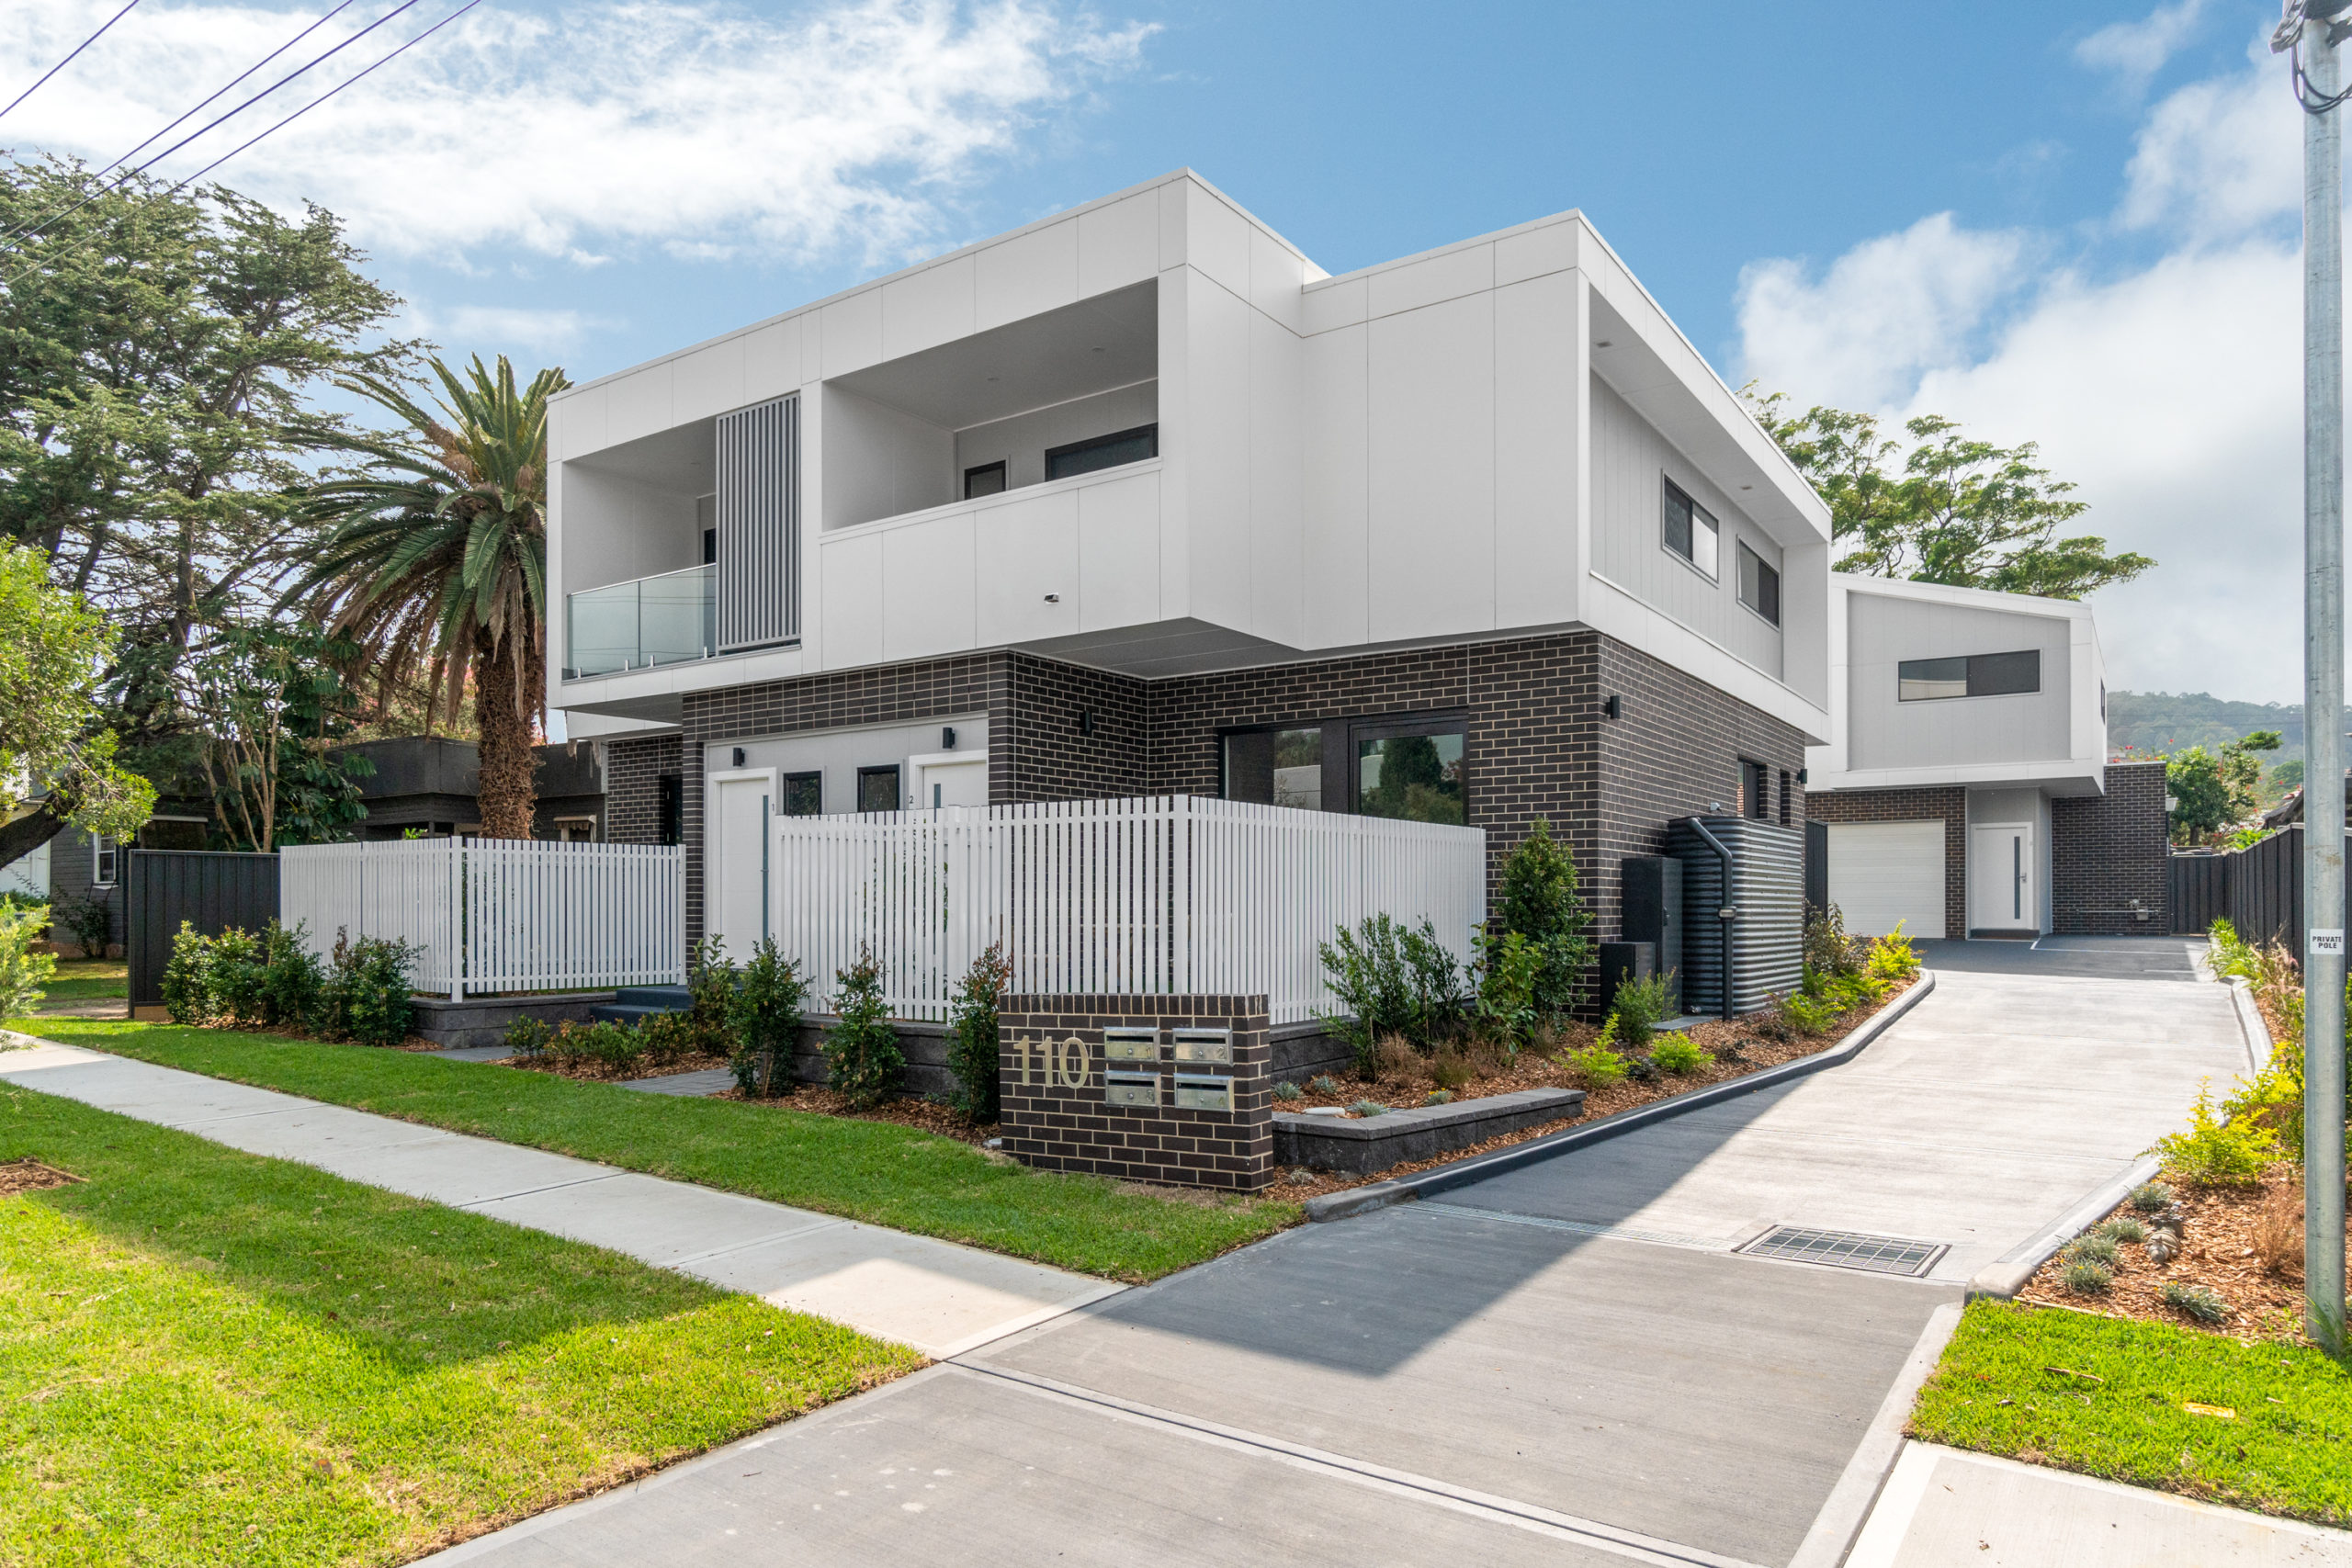 Featured image for “110 Lakeview Street, Speers Point”